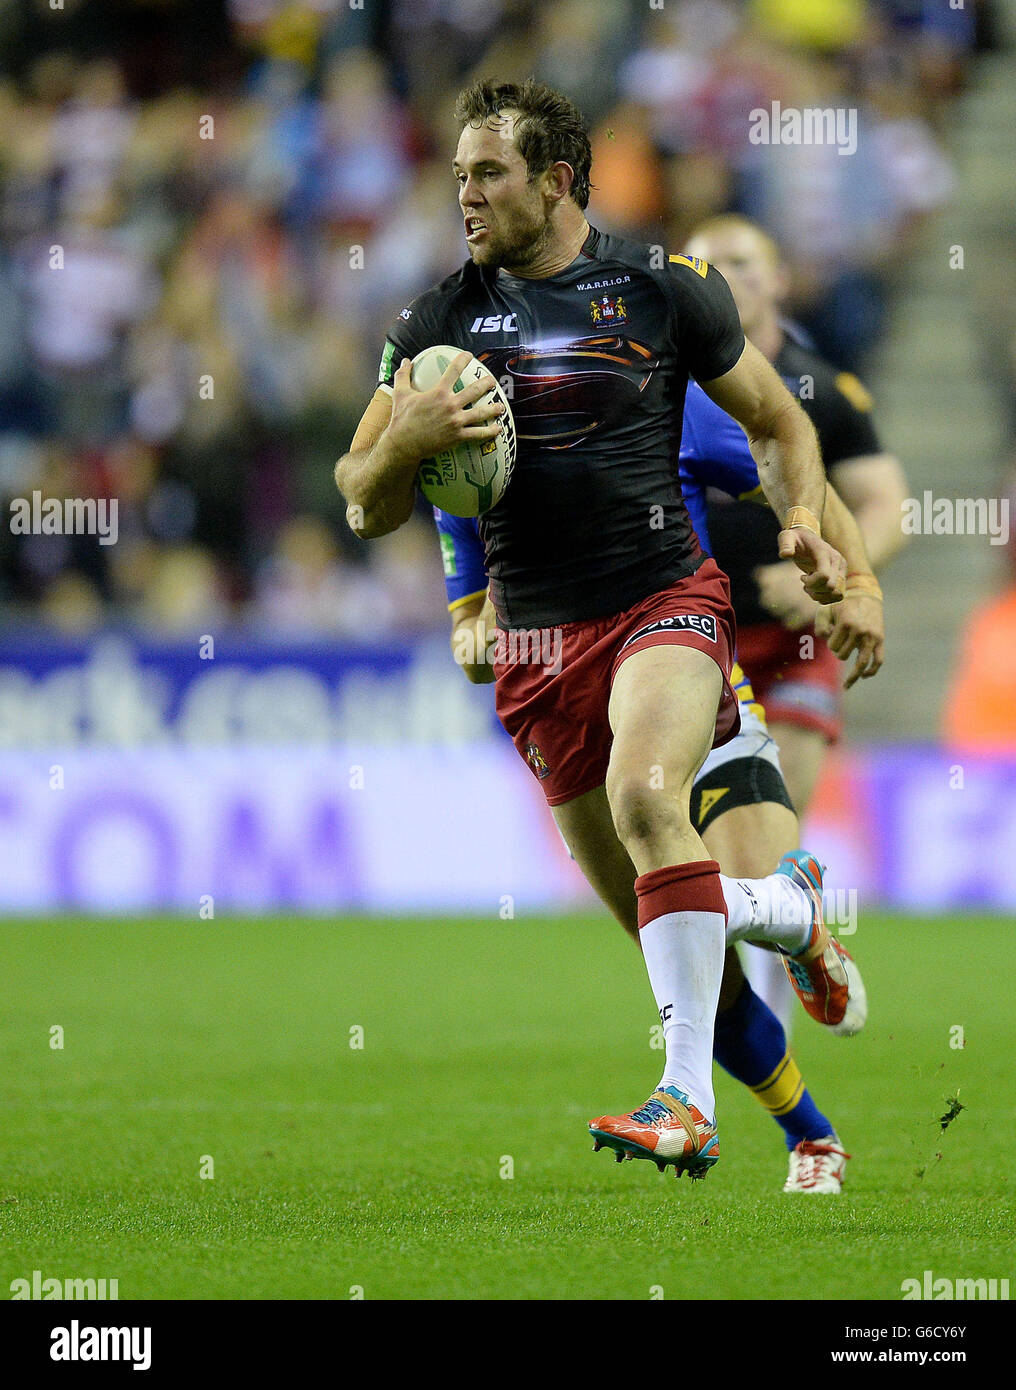 Rugby League - Super League - Wigan Warriors v Leeds Rhinos - DW Stadium. Wigan Warriors Pat Richards breaks clear to score a try against Leeds Rhinos, during the Super League match at the DW Stadium, Wigan. Stock Photo